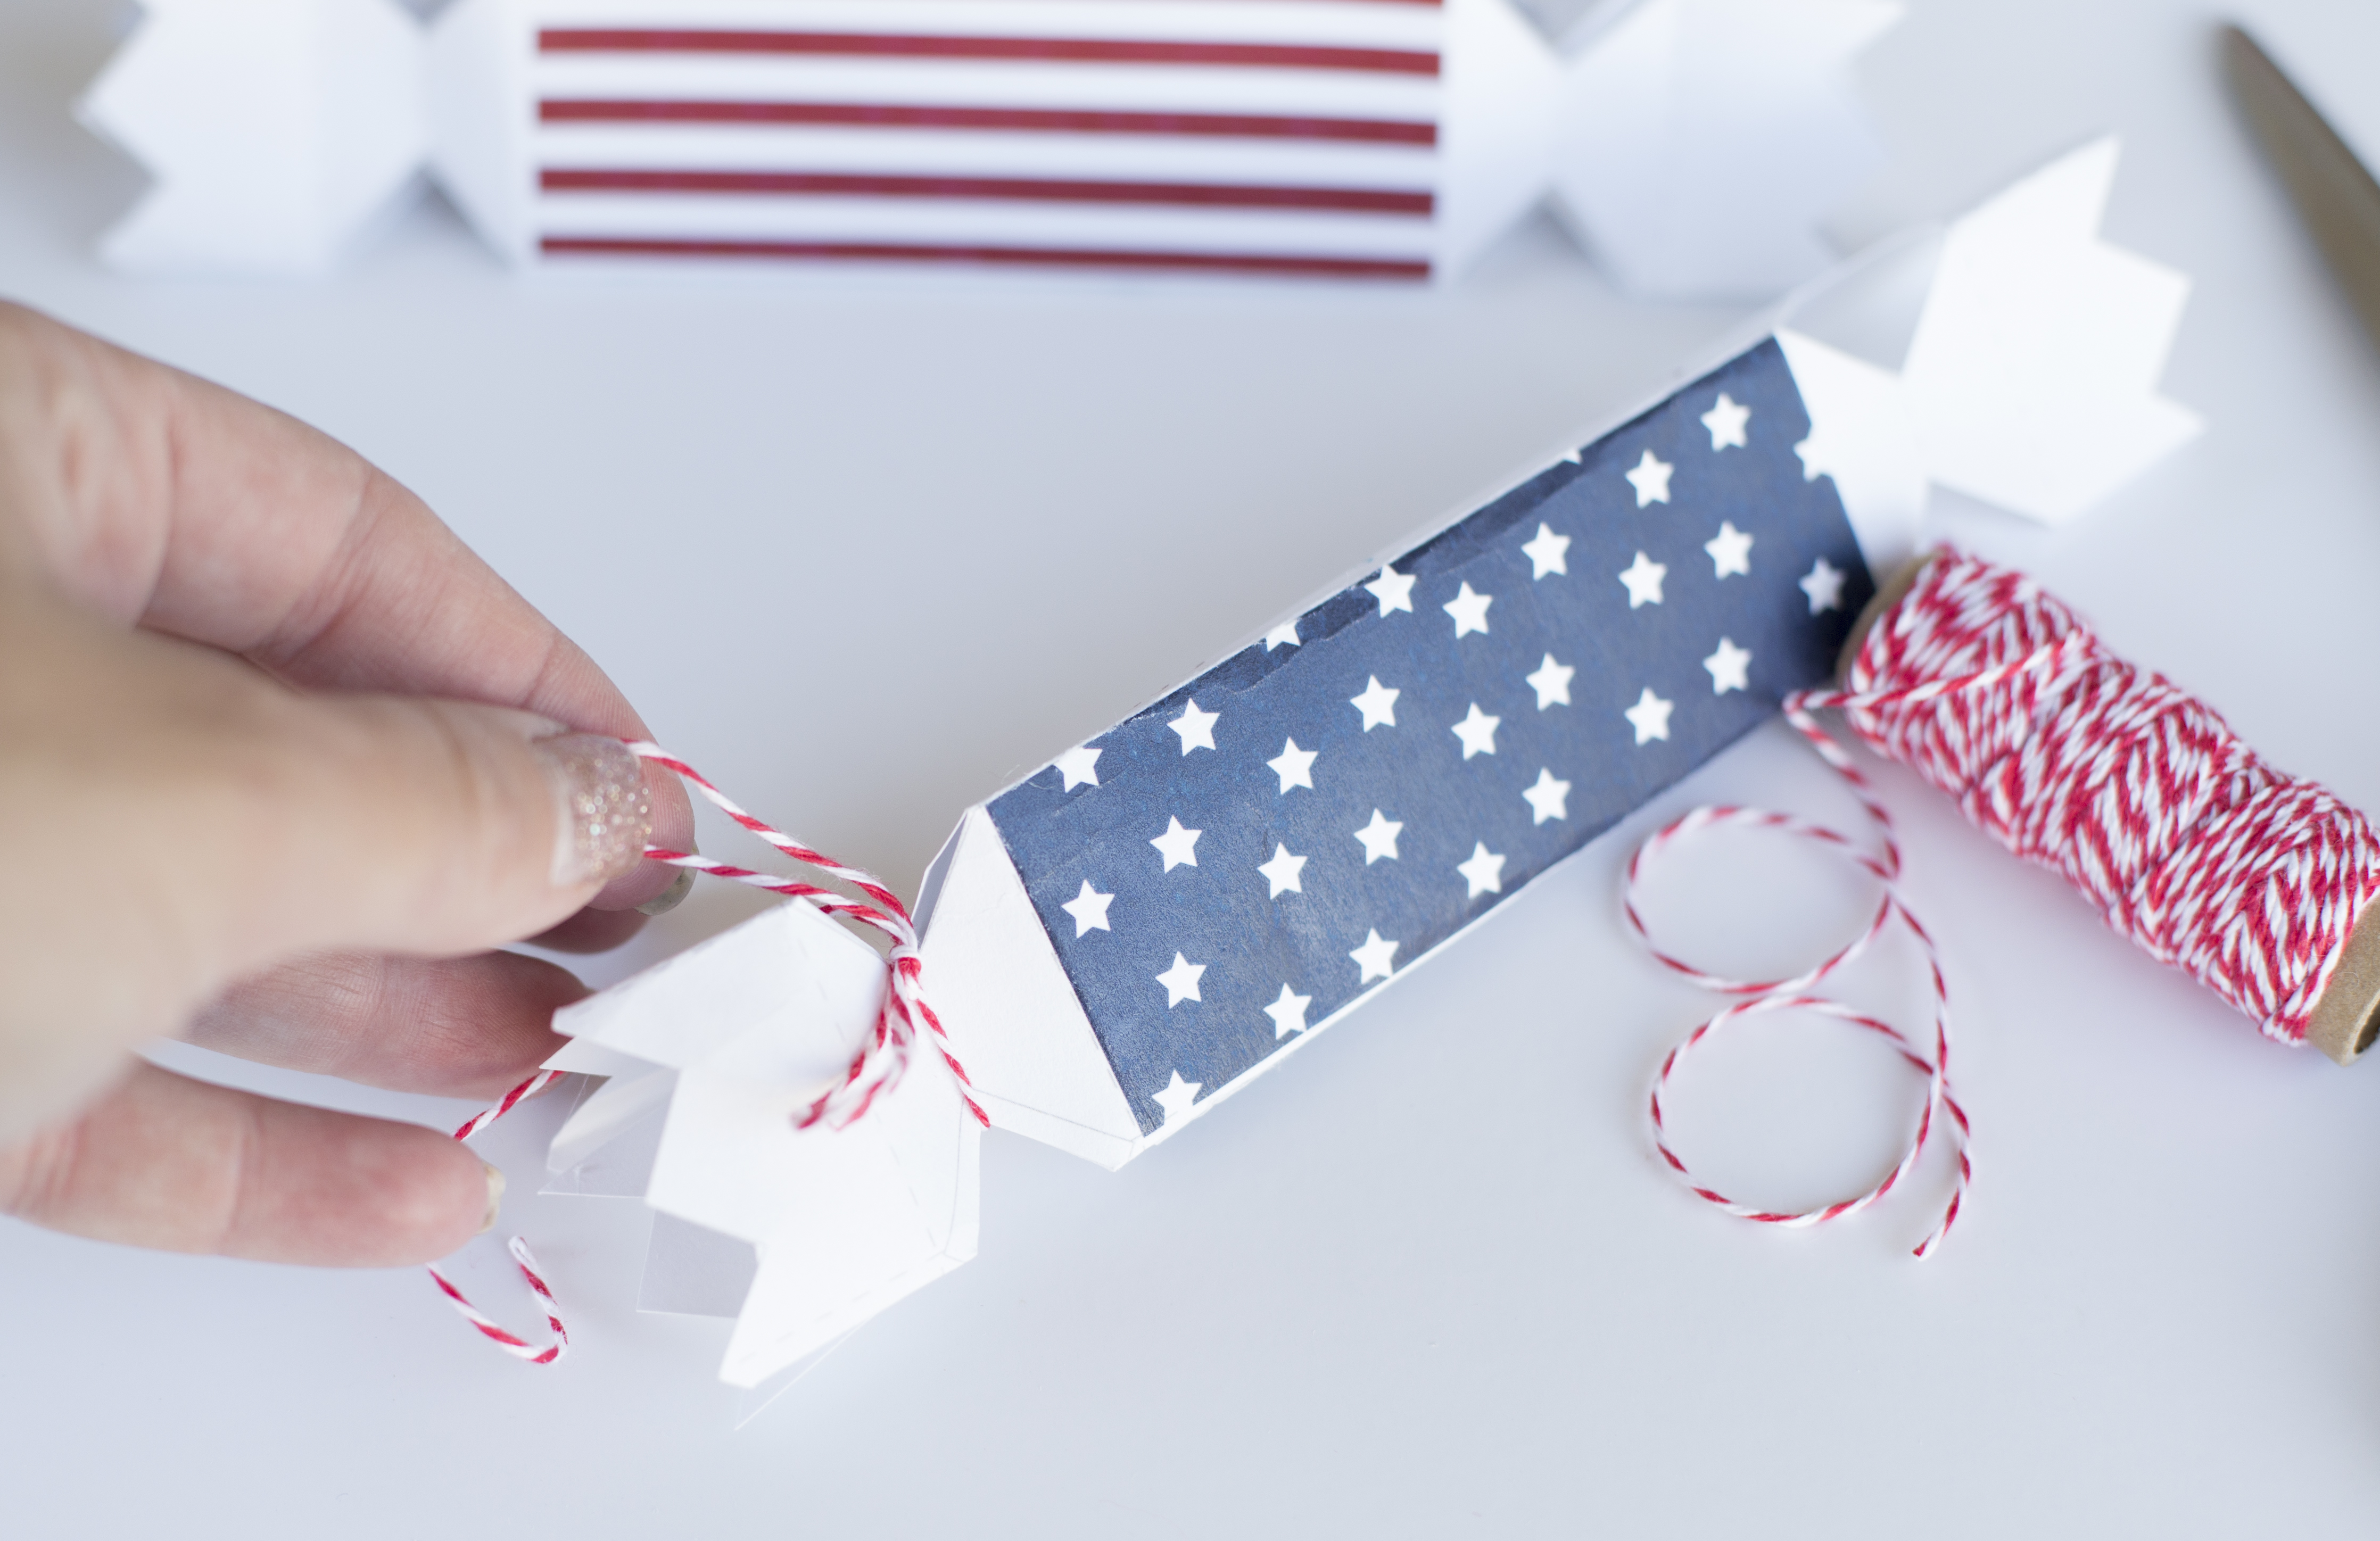 Love these adorable free printable 4th of July Favor Boxes.